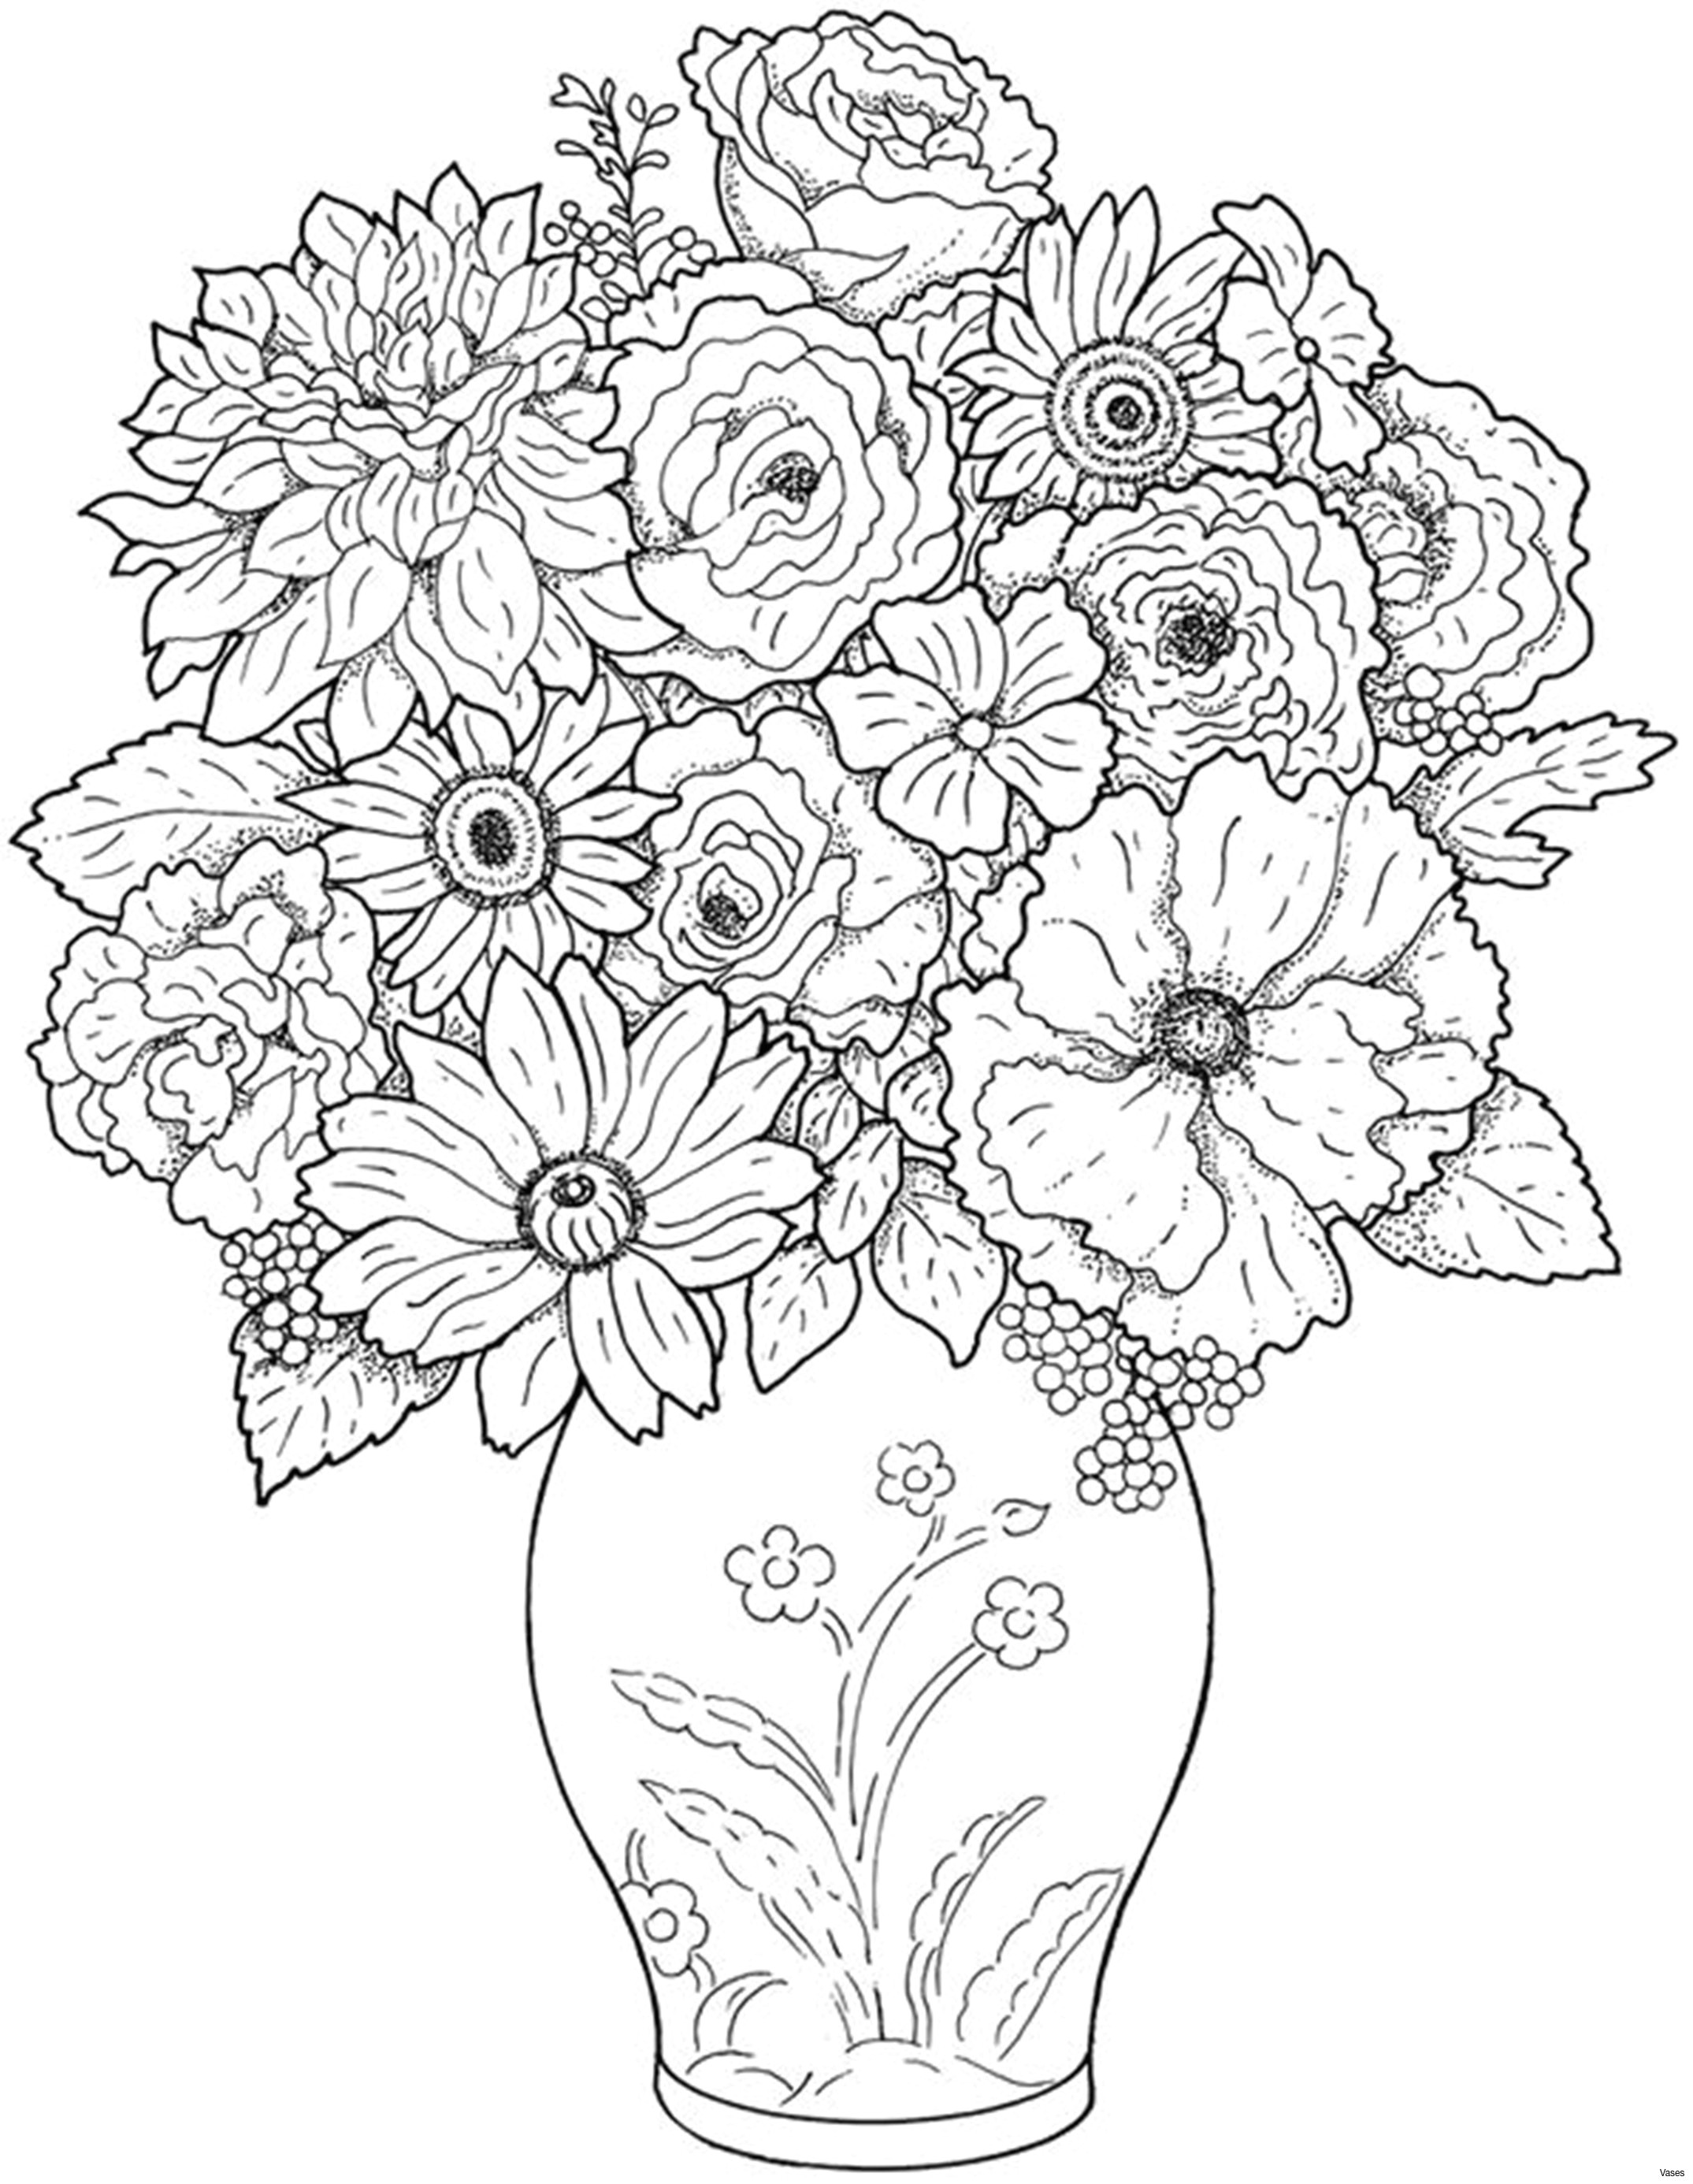 Flowers Drawing and Name Www Colouring Pages Aua Ergewohnliche Cool Vases Flower Vase Coloring